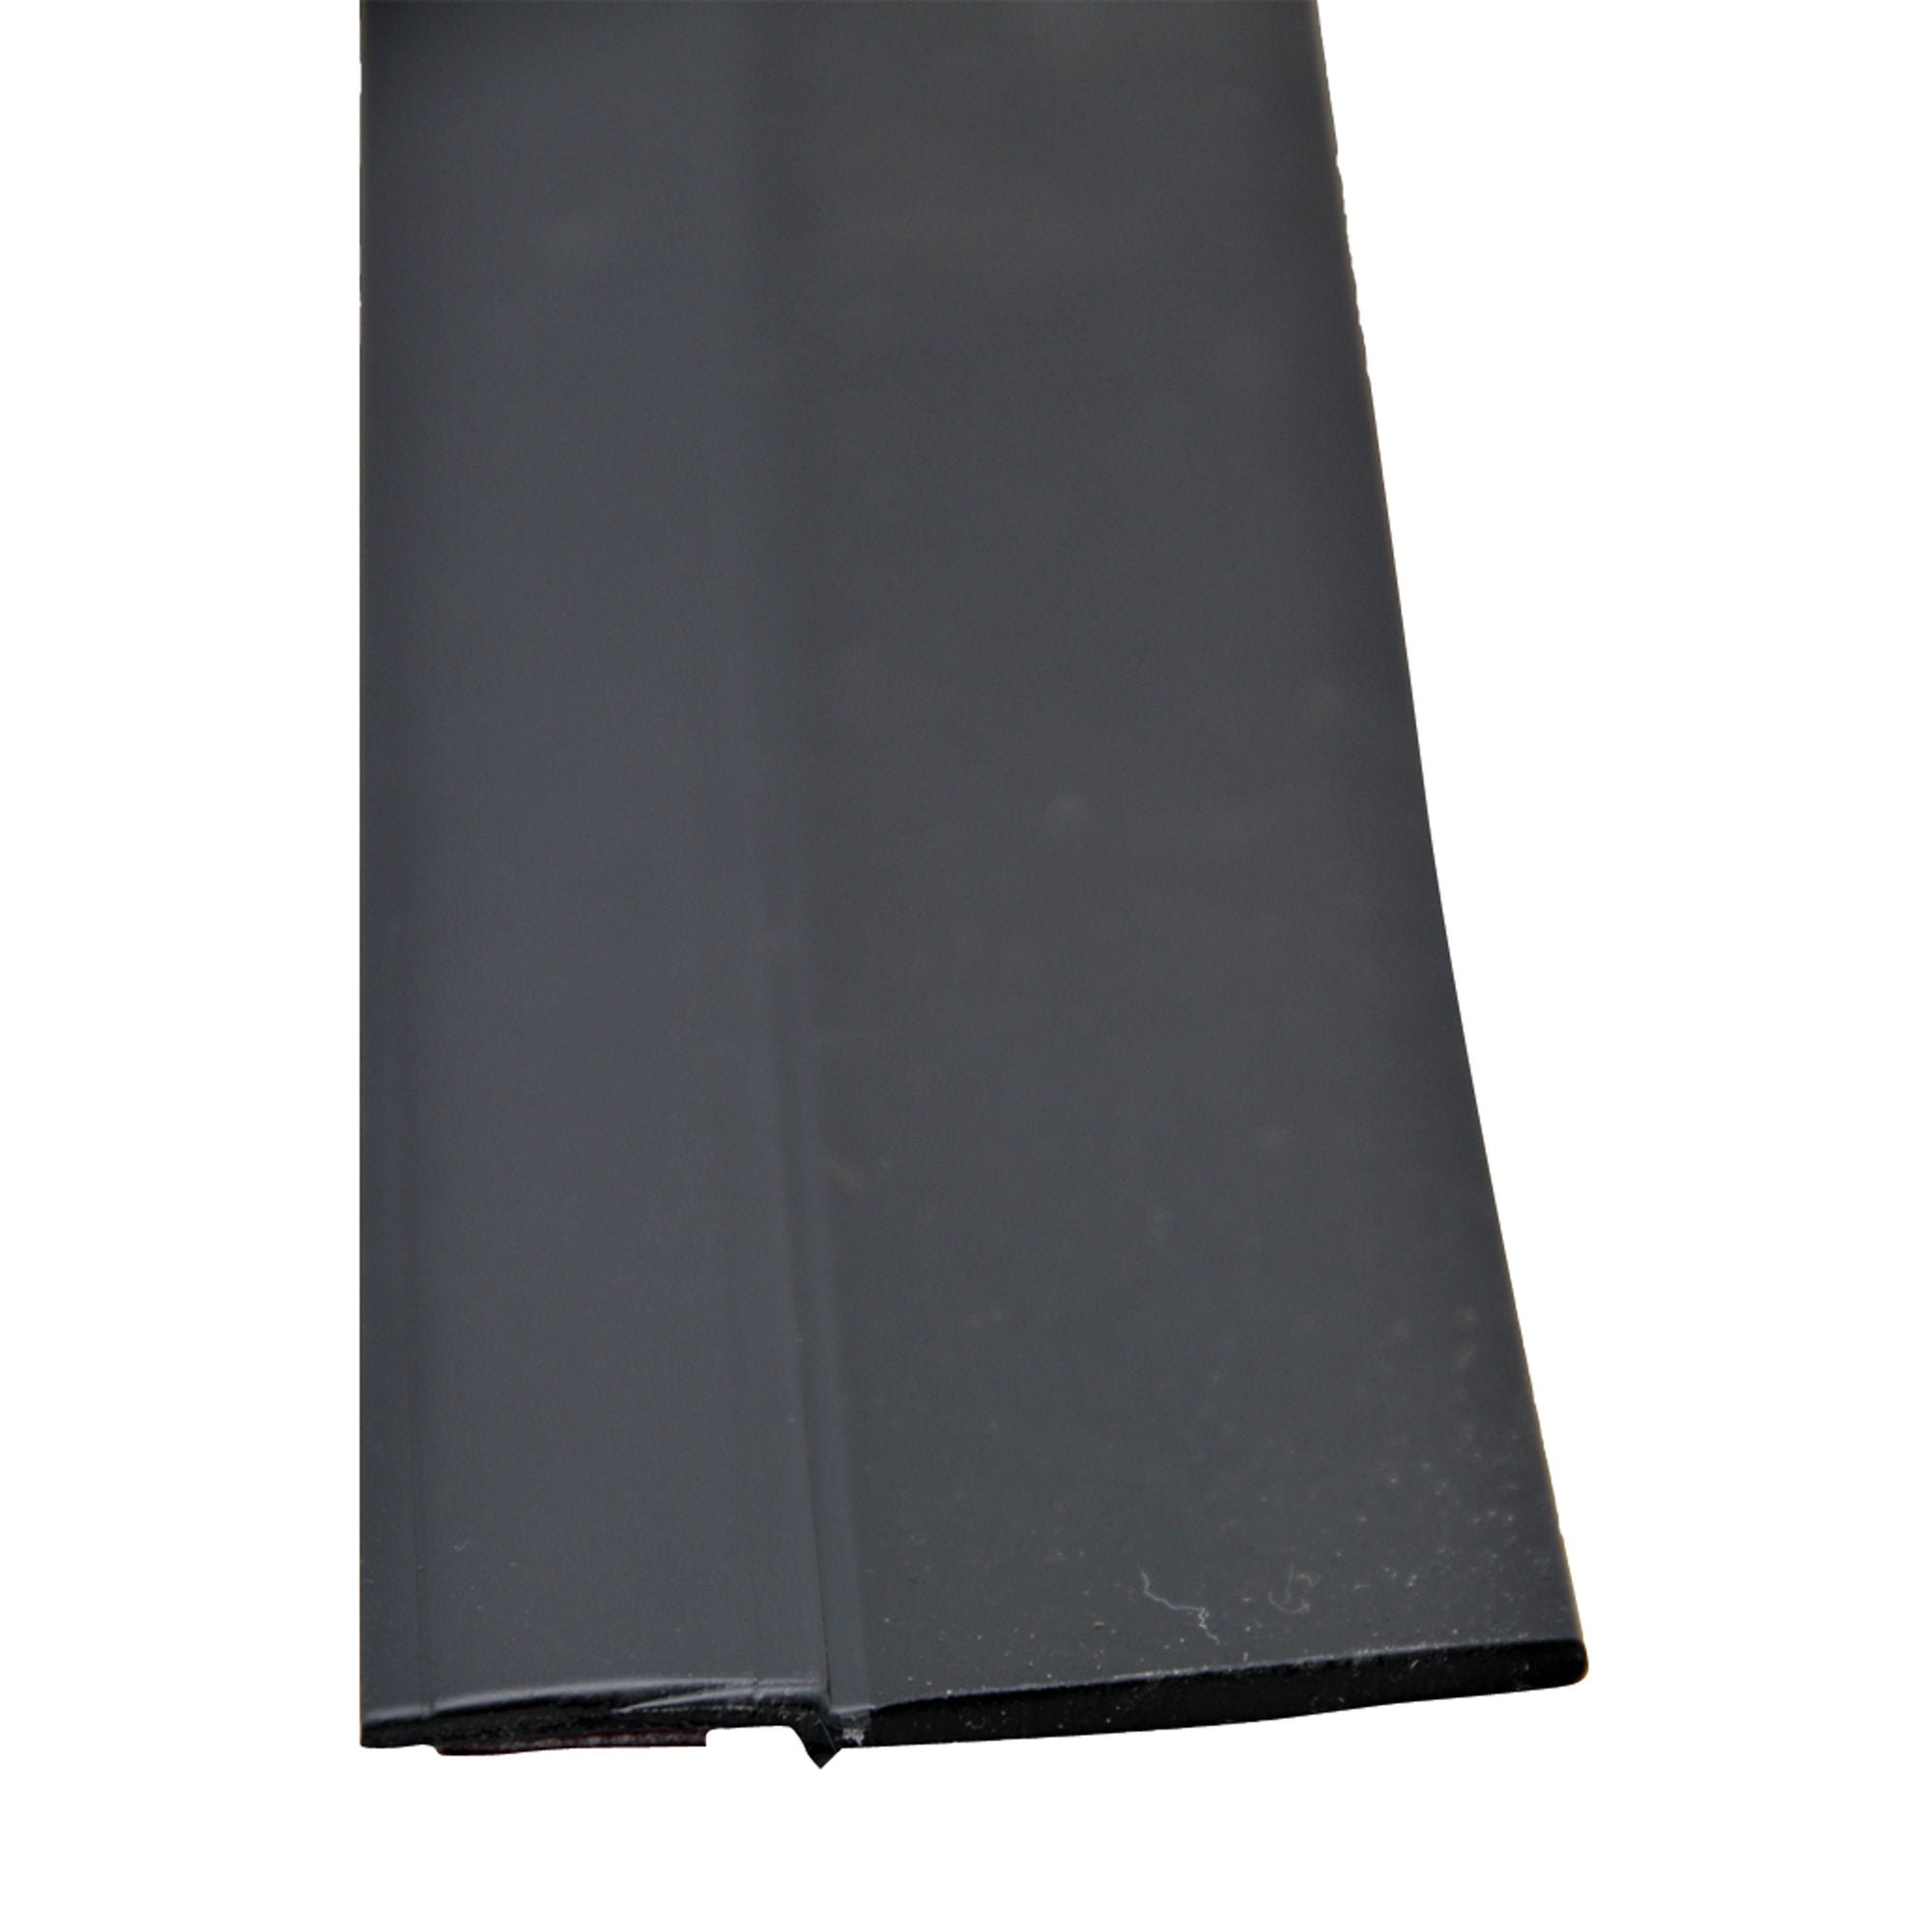 AP Products 018-1723 Black EK Seal Base with Hats Tape and 1-1/4" Wiper - 1/4" x 2" x 35'